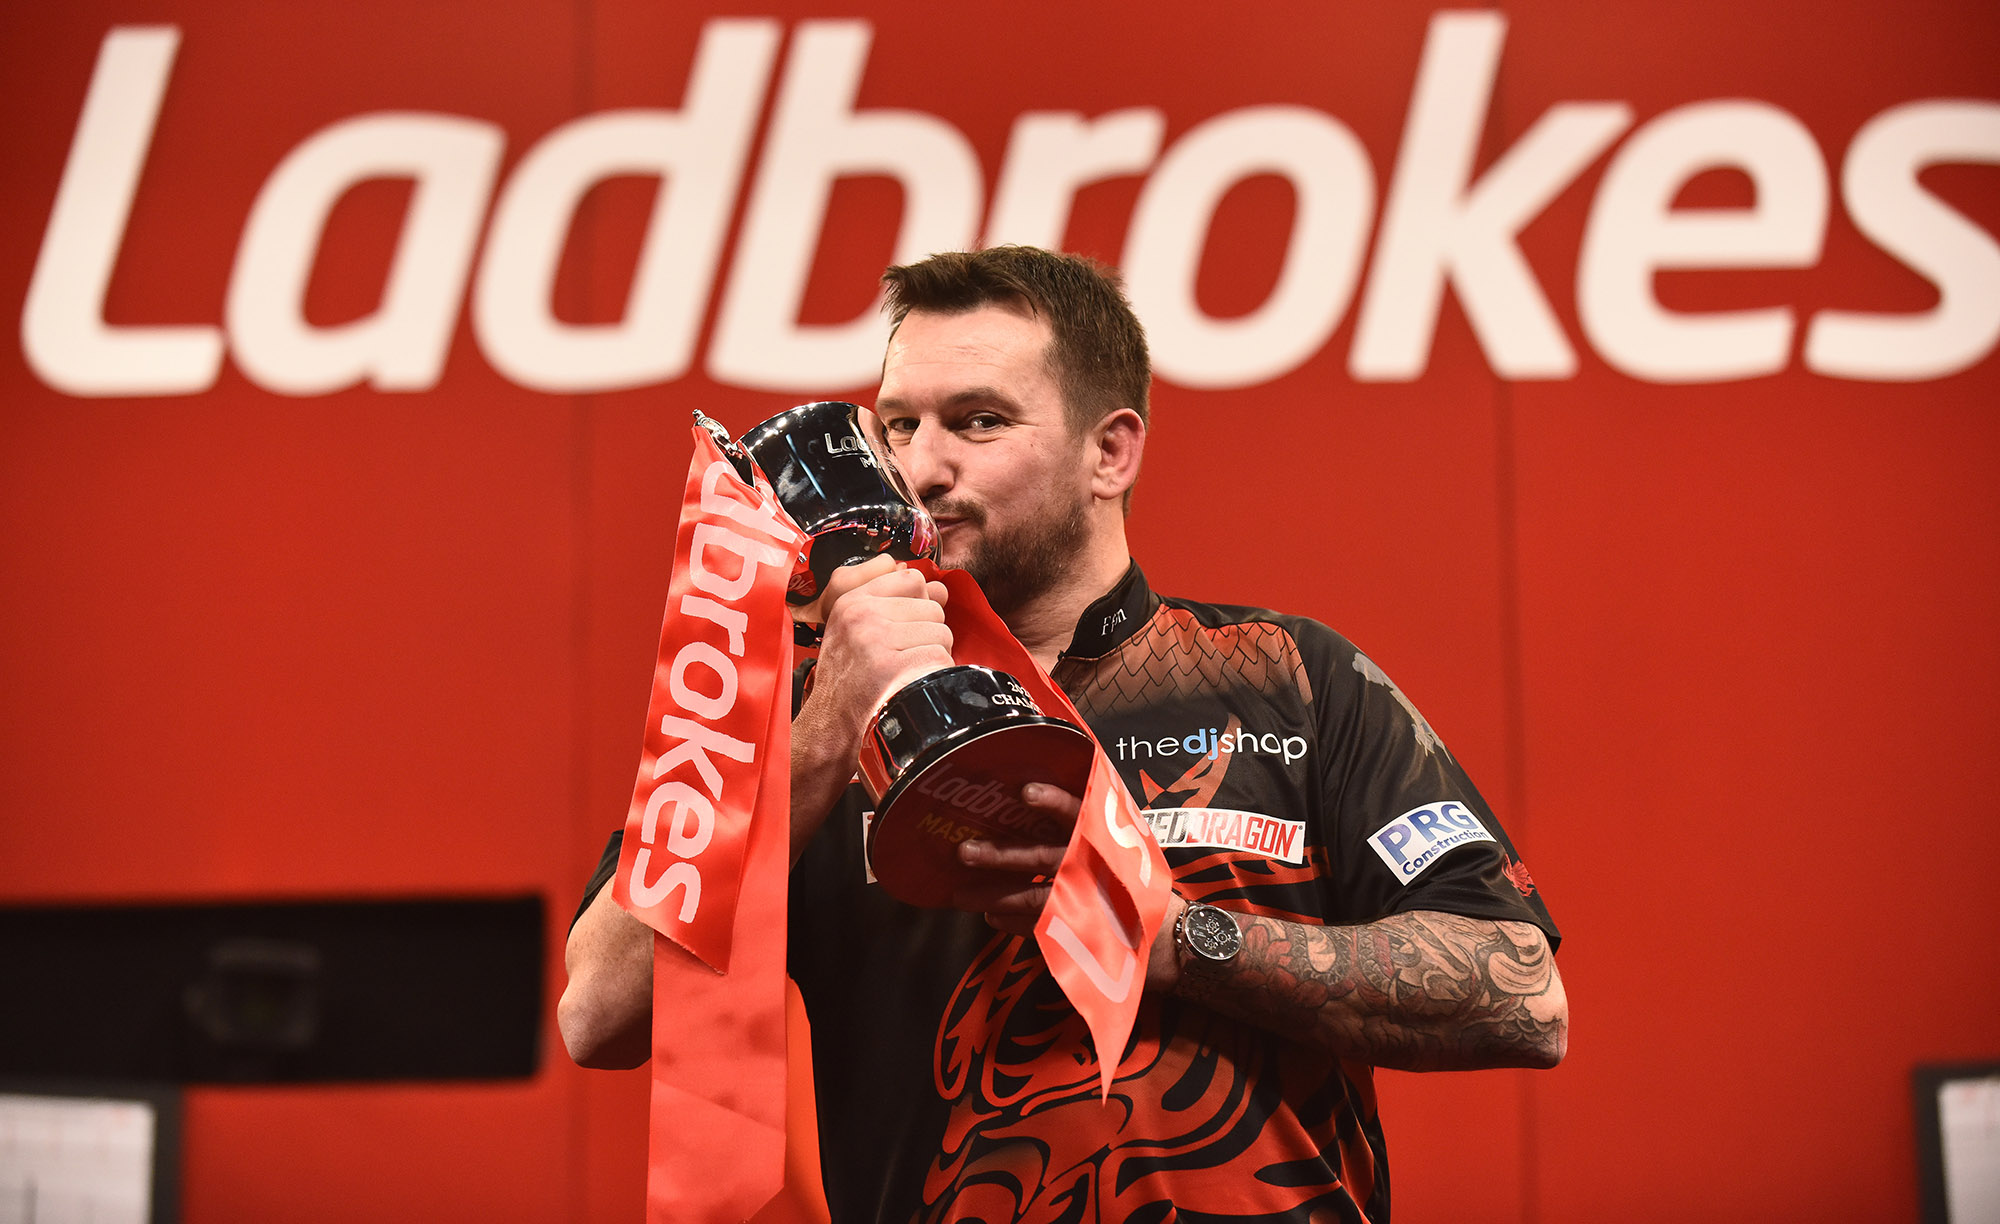 Masters 2022 Schedule 2022 Ladbrokes Masters Draw & Schedule Of Play Confirmed | Pdc